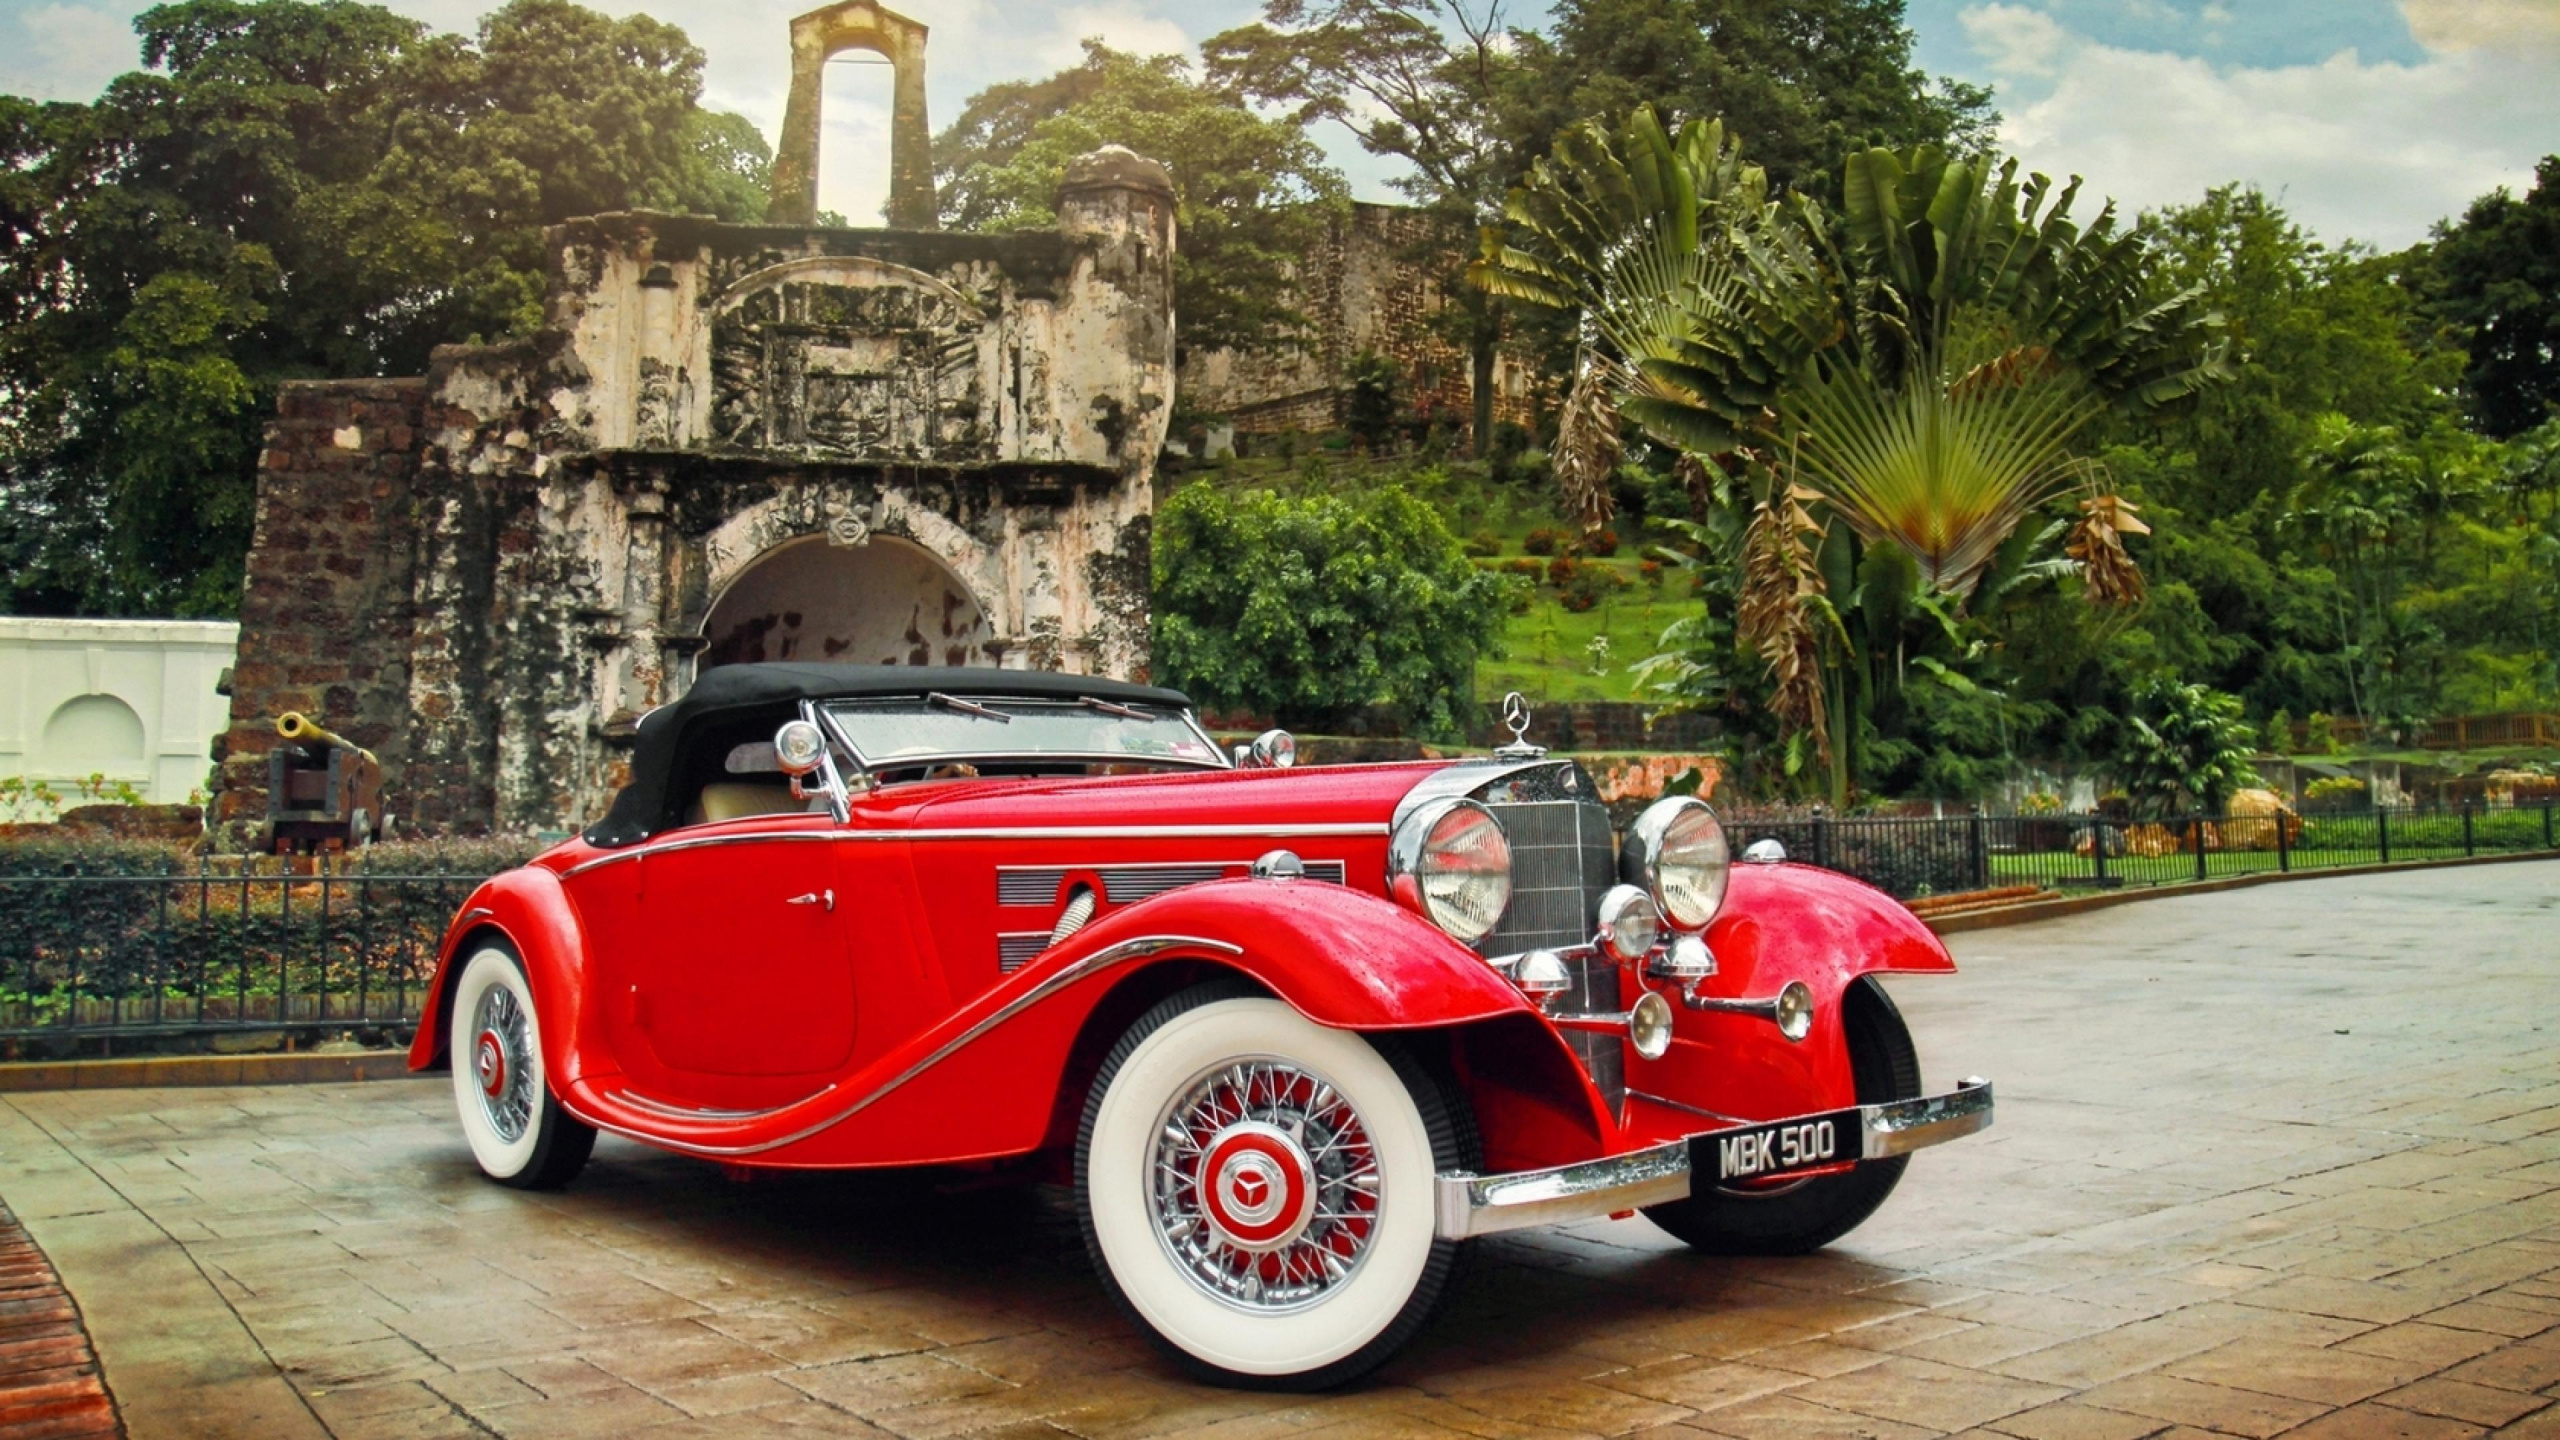 Red and White Vintage Car. Wallpaper in 2560x1440 Resolution